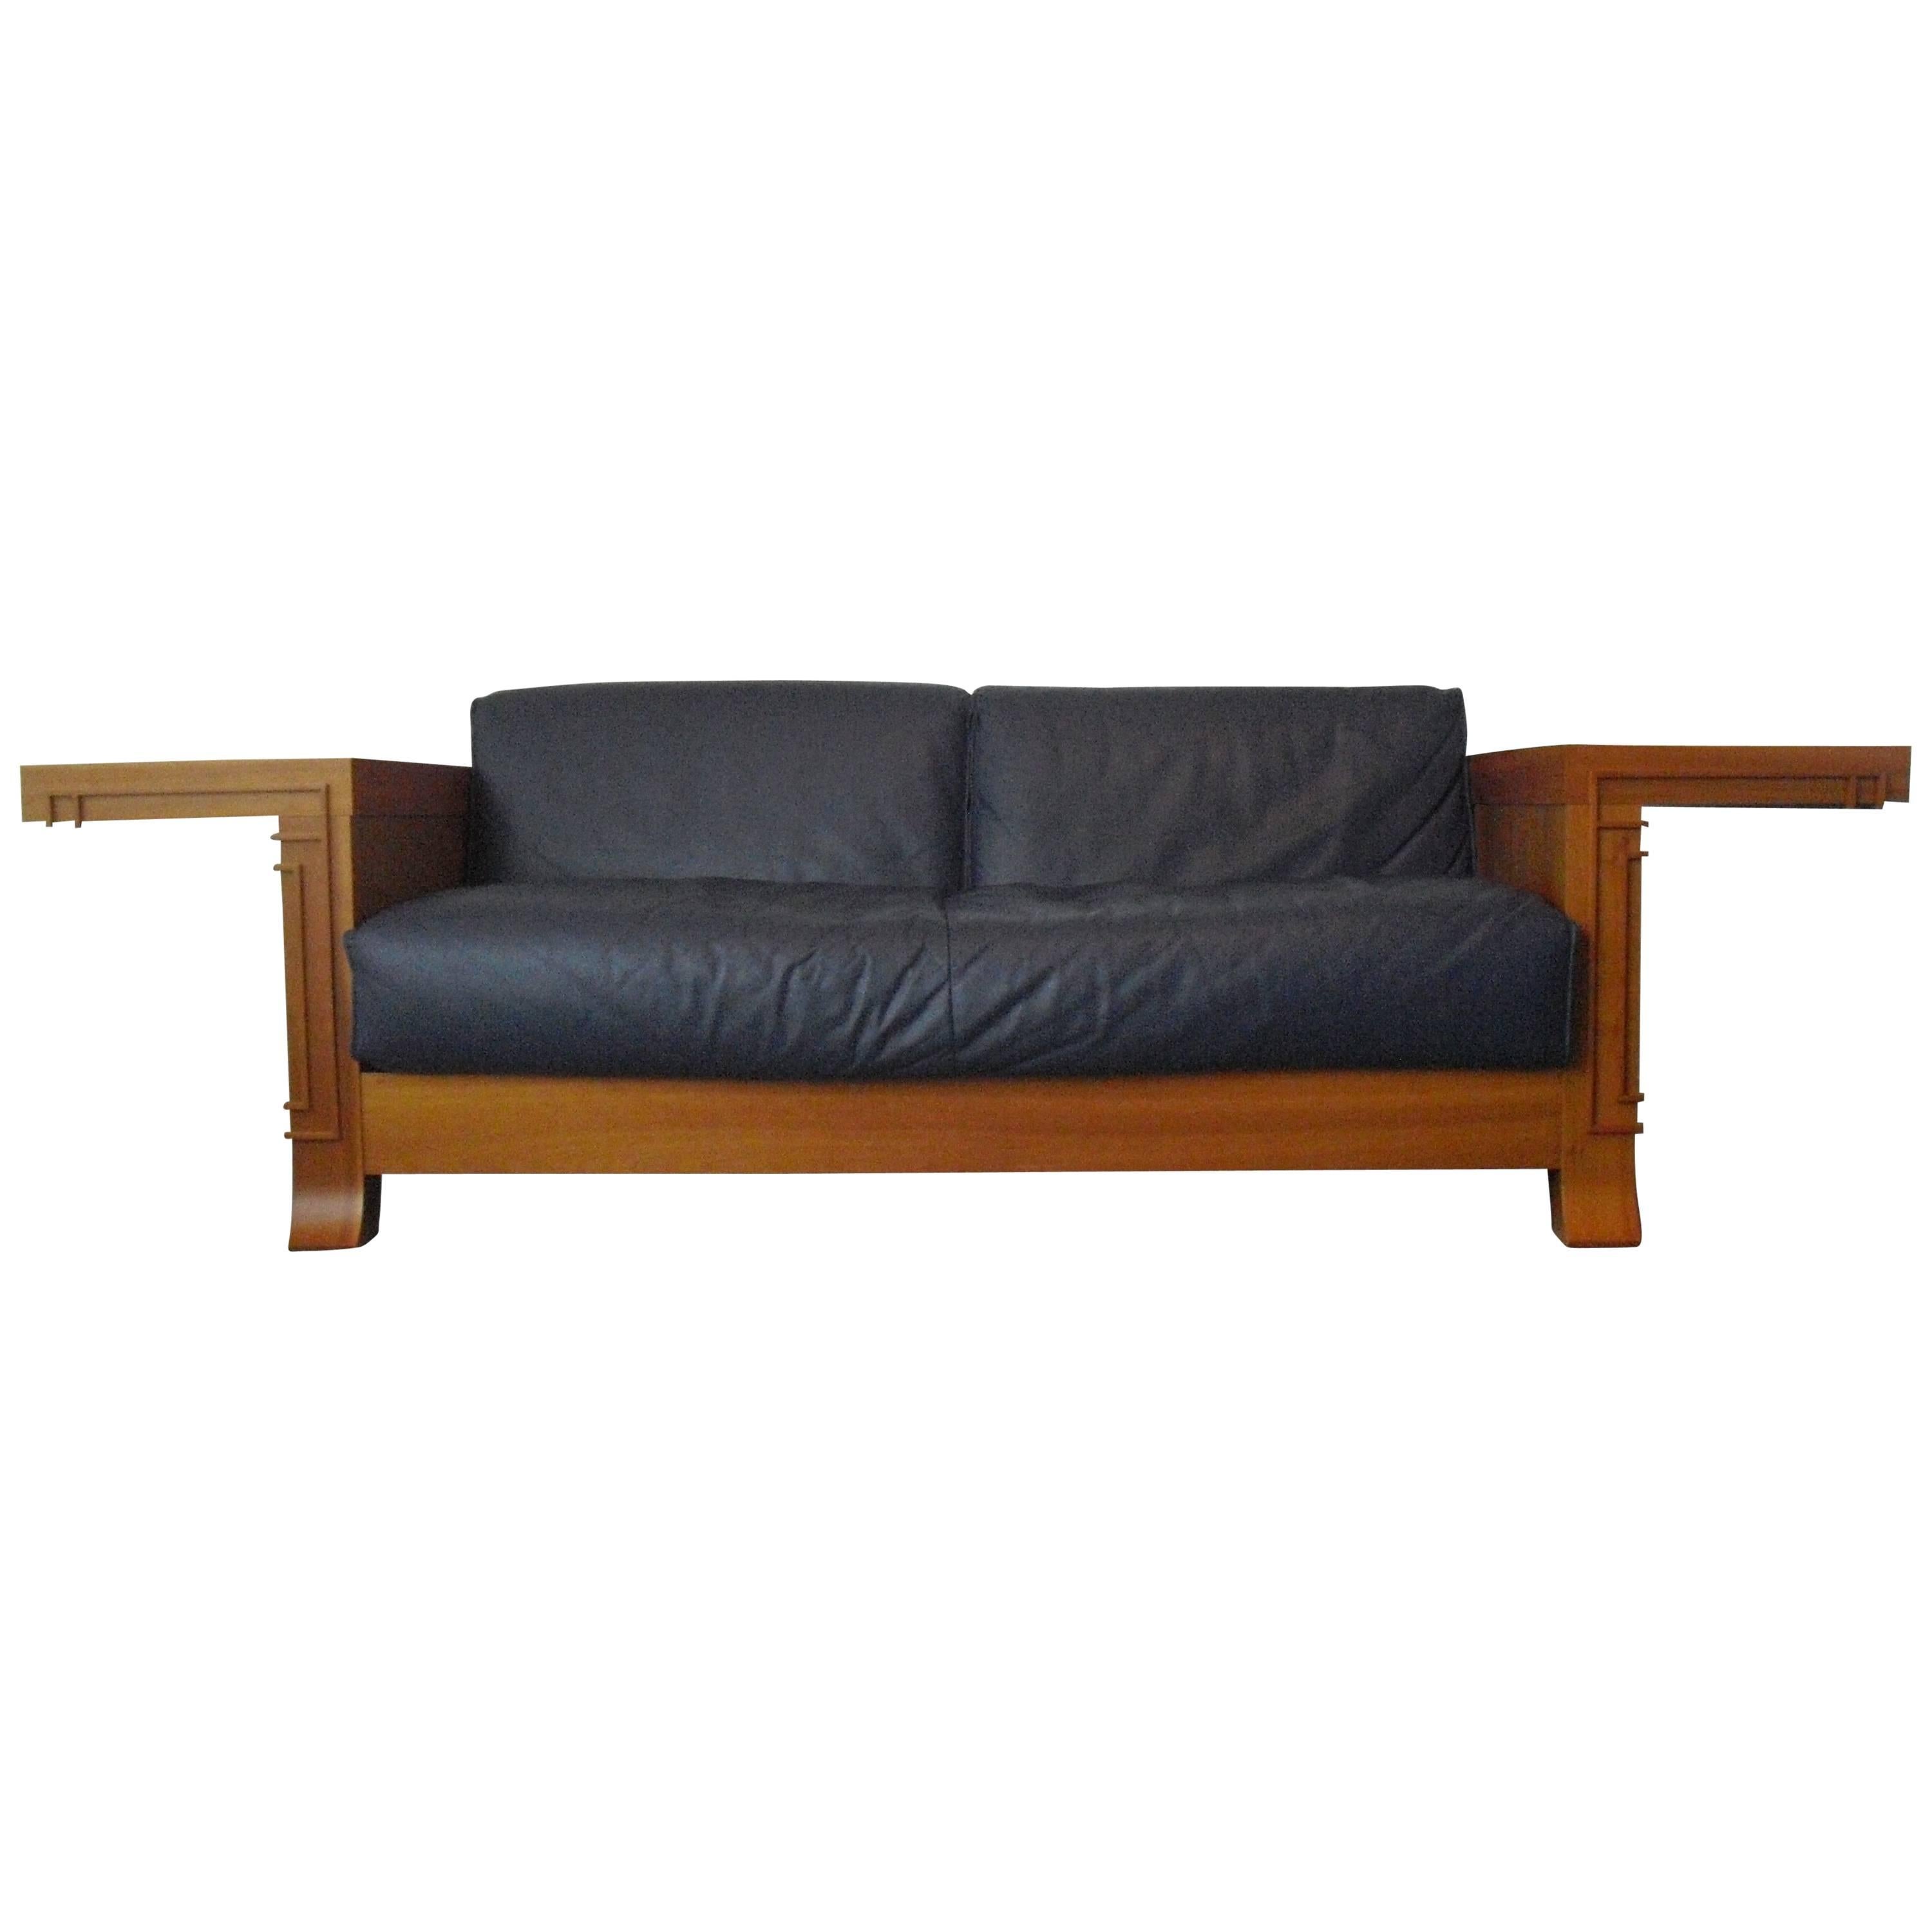 Art-Deco Cassina Robie 3 Two-Seat Leather Sofa by Frank Lloyd Wright For Sale